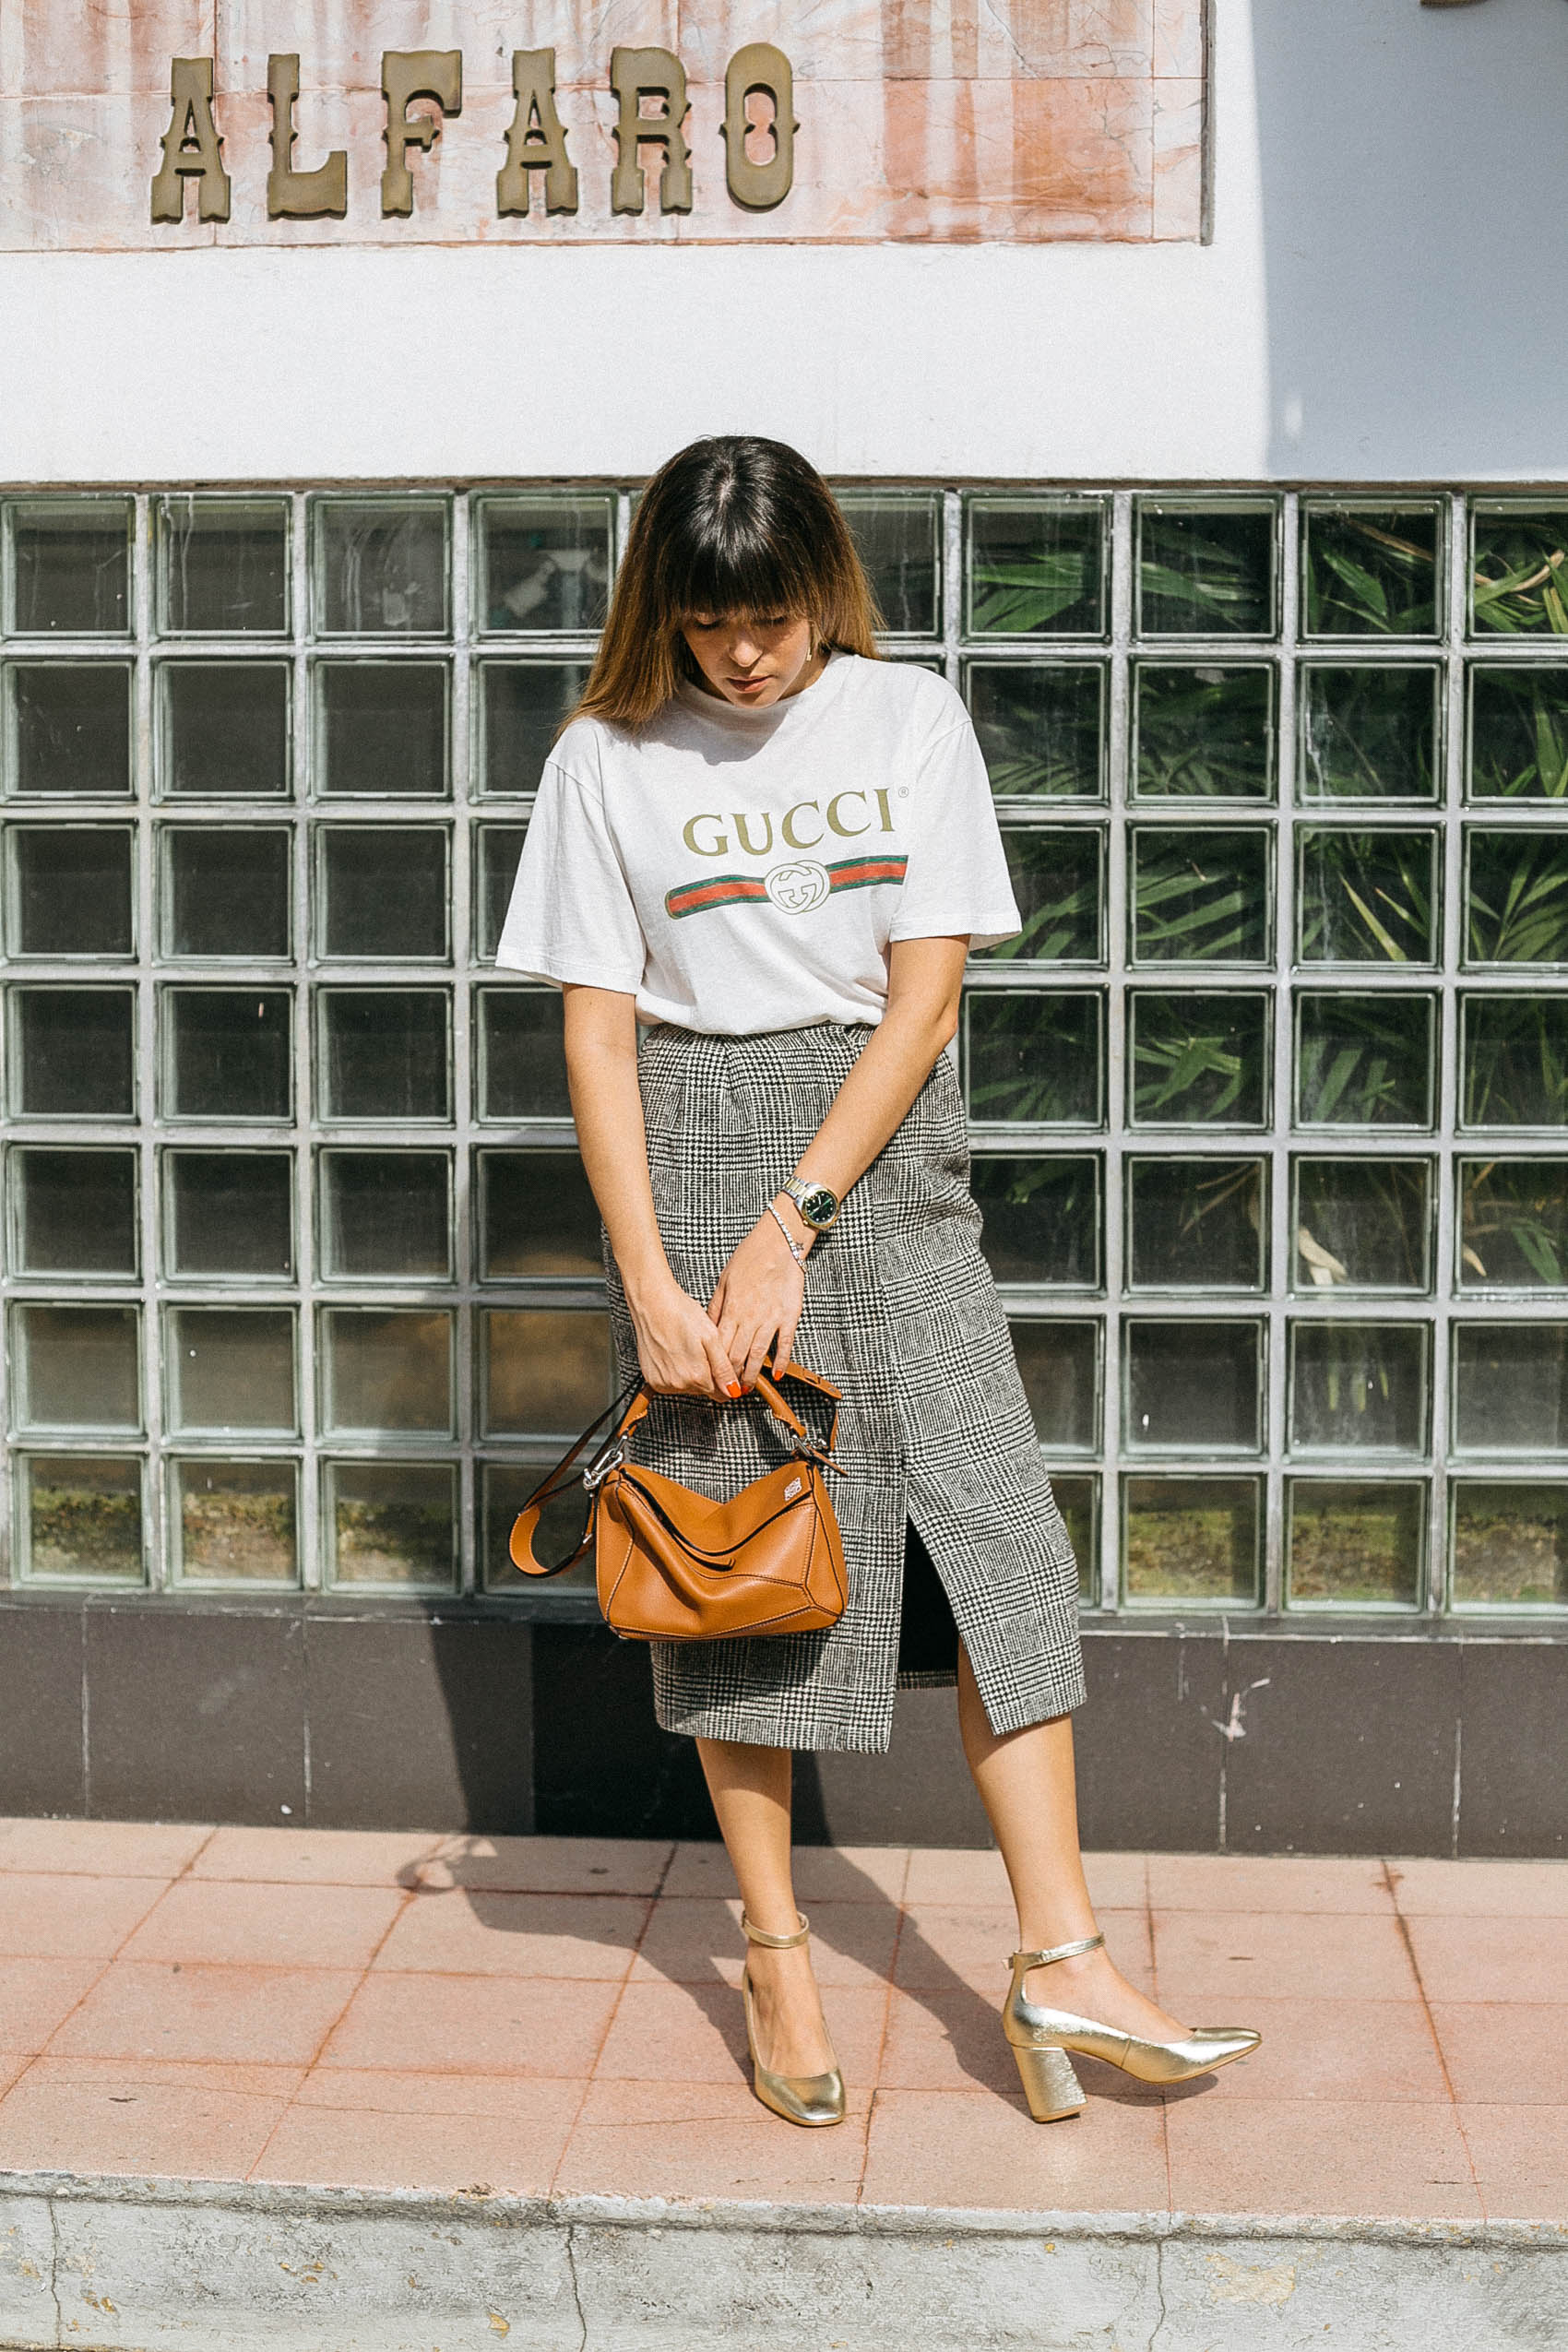 Maristella wears the Gucci vintage logo tee with a plaid wool button front pencil skirt from MaxMara, Stradivarius shoes and Loewe Bag